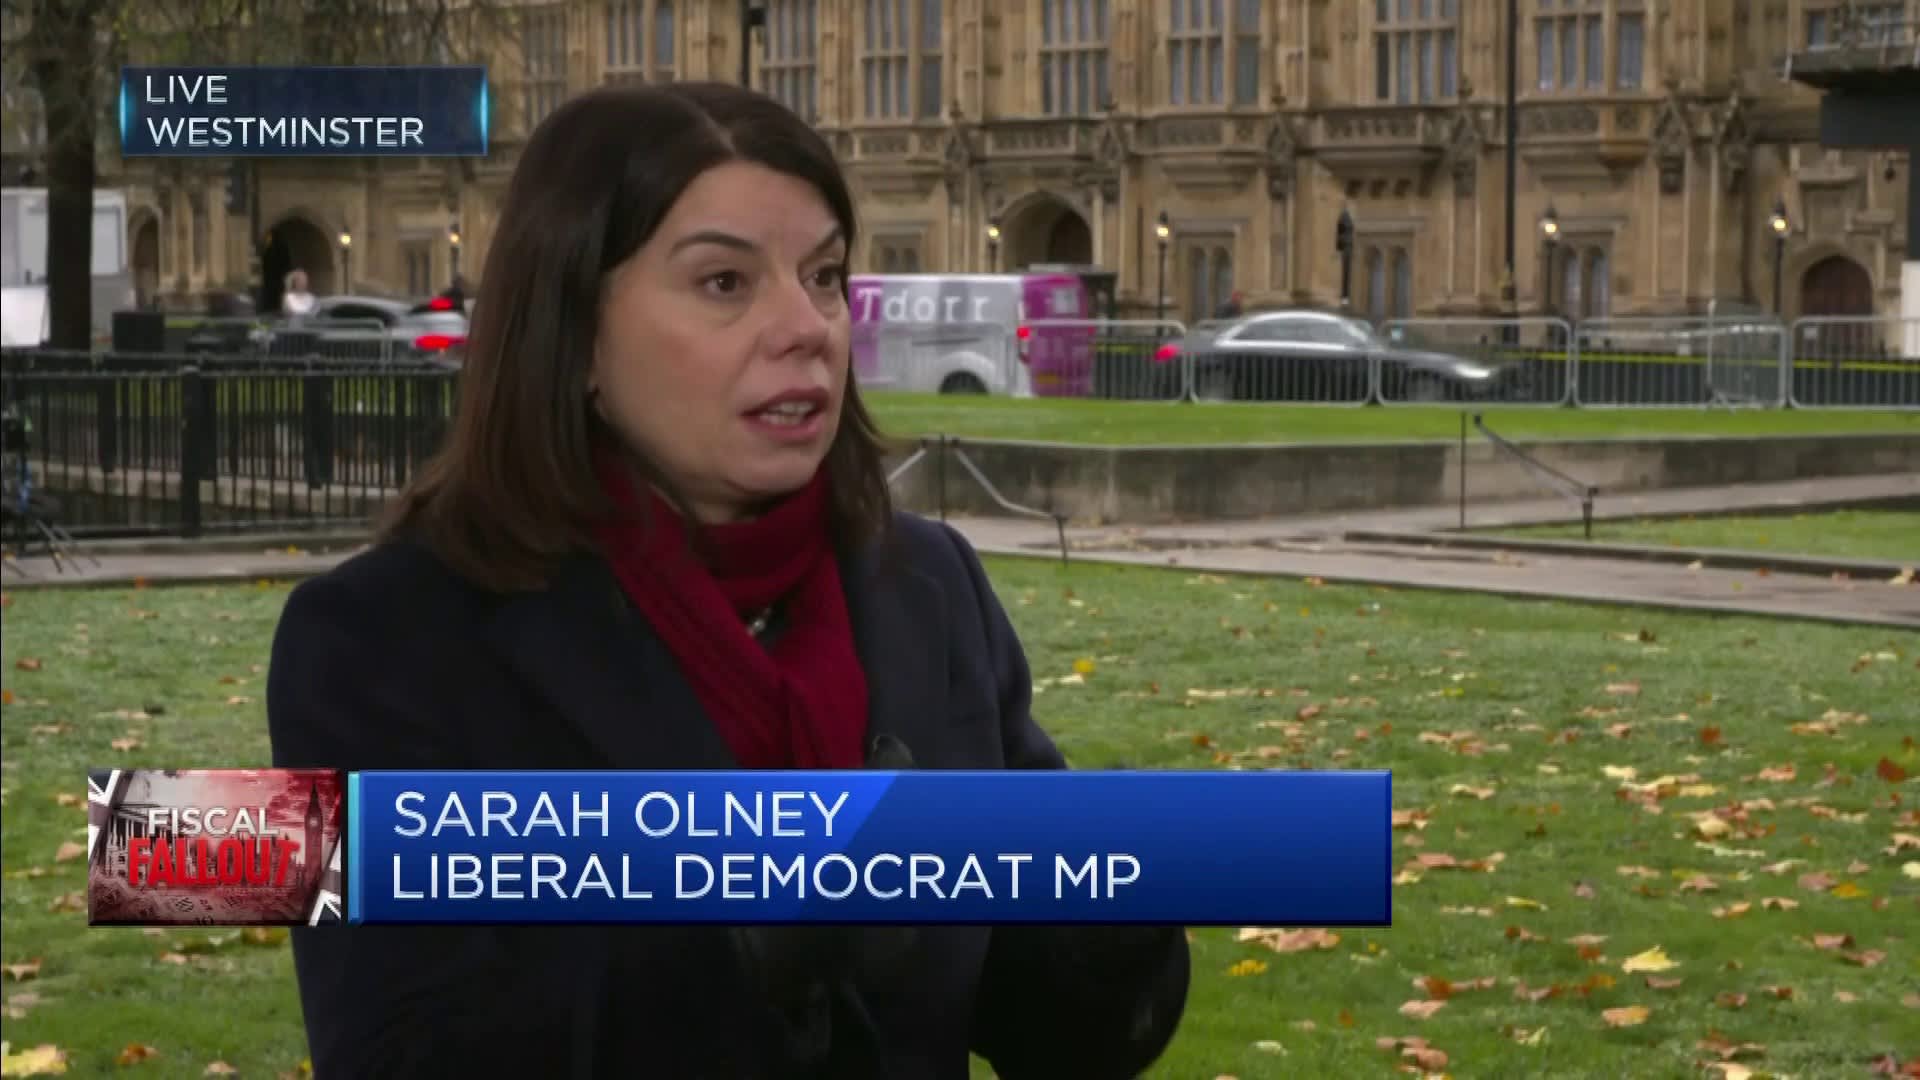 UK fiscal plan has large margin for error on OBR forecasts, says Liberal Democrat MP